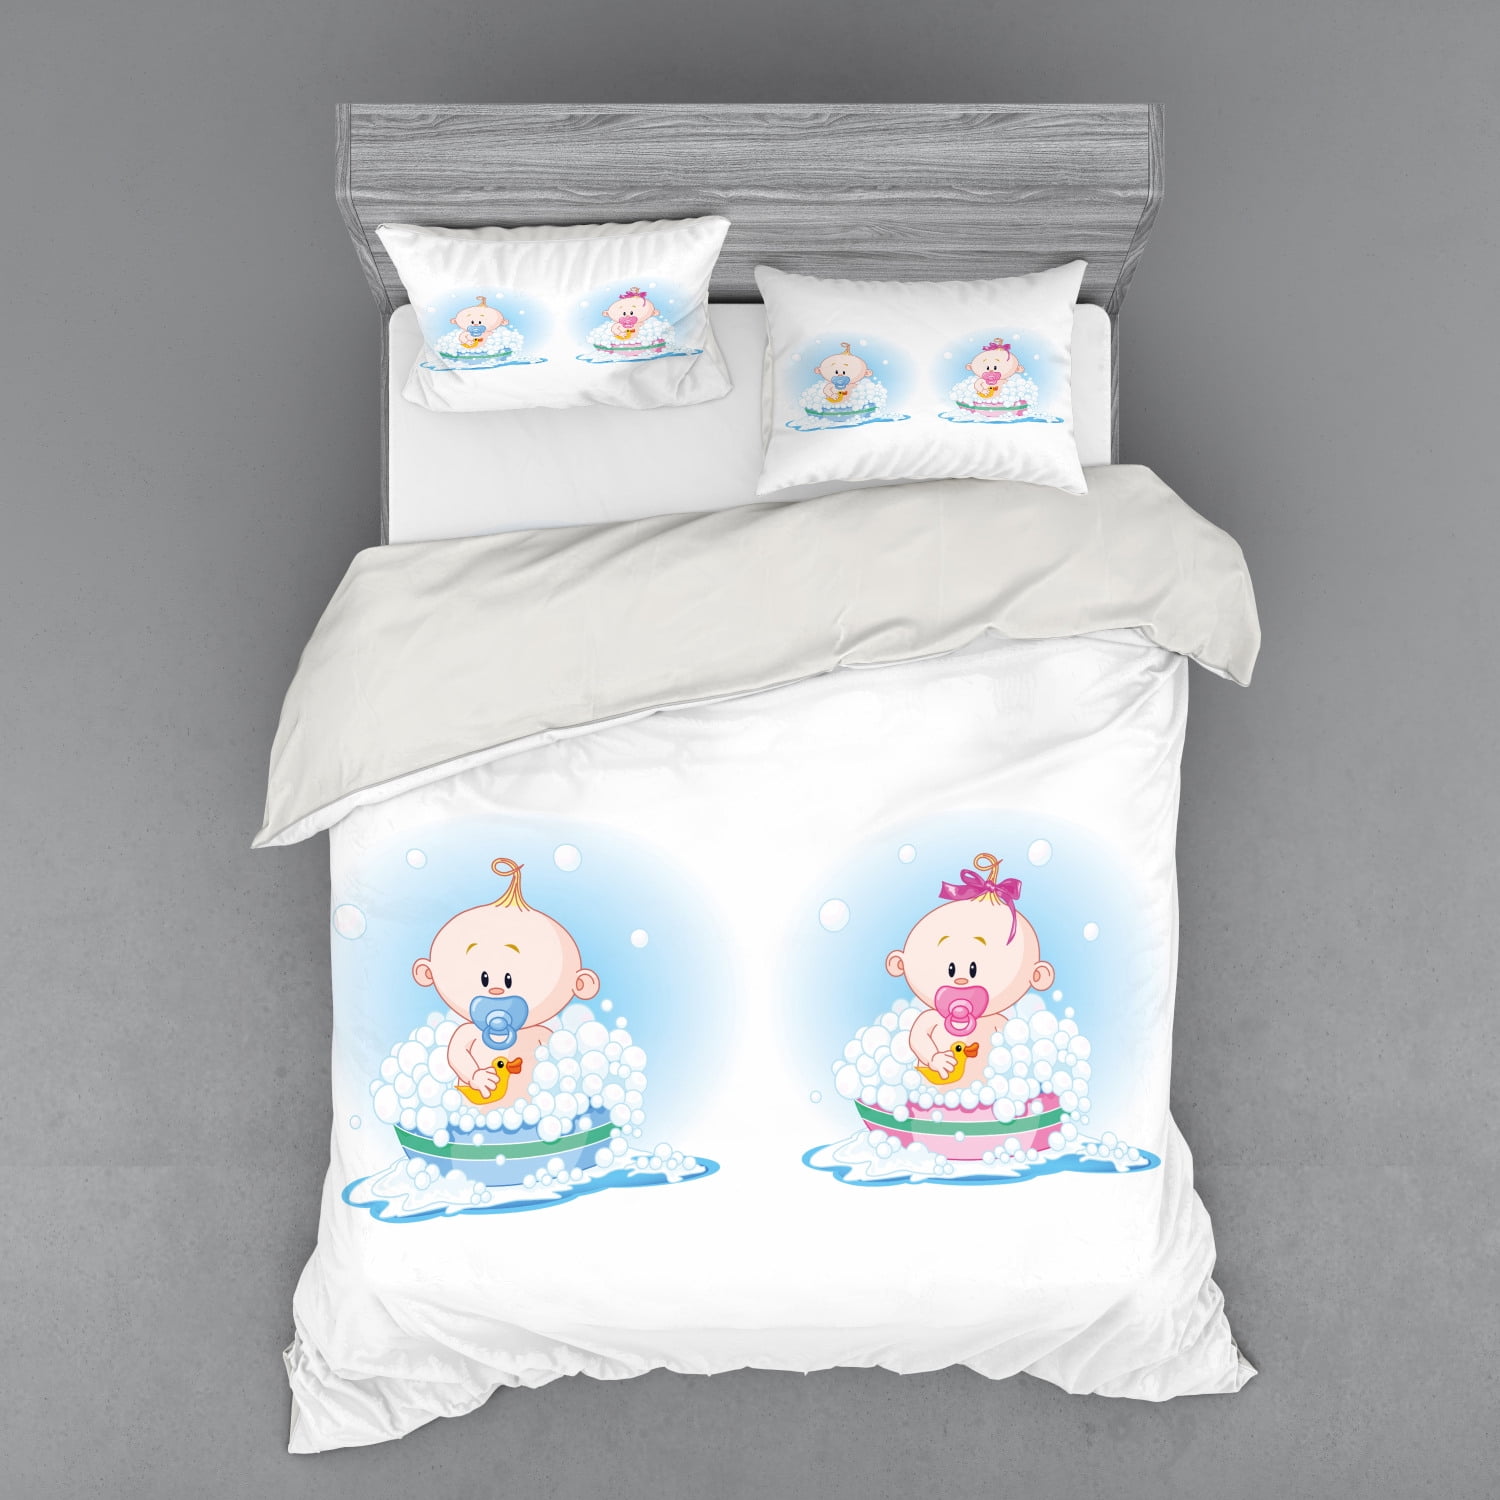 Gender Reveal Duvet Cover Set Girl And Boy Babies In Bath With